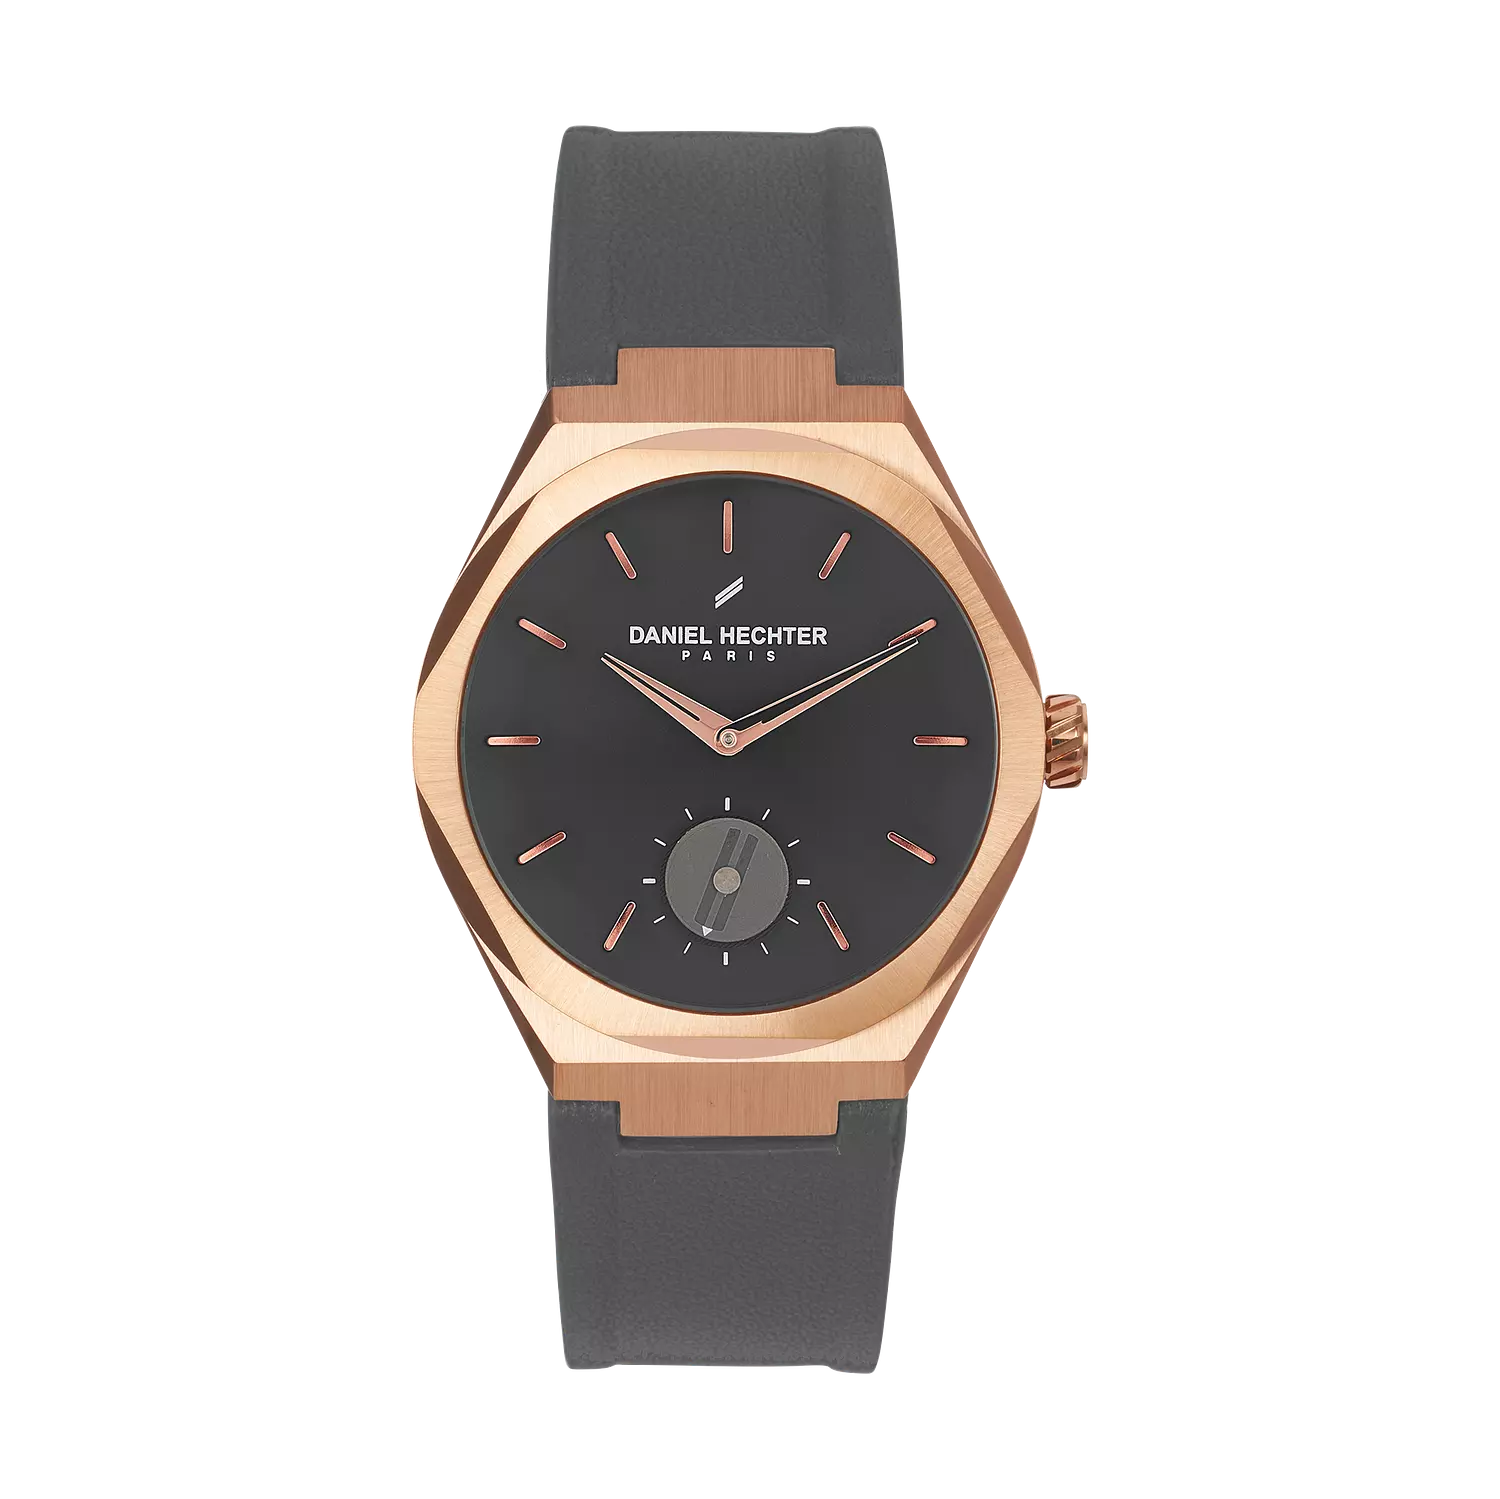 Daniel Hechter Wrist Watch DHL00201 - Rose Gold Case - Grey Silicone Strap hover image